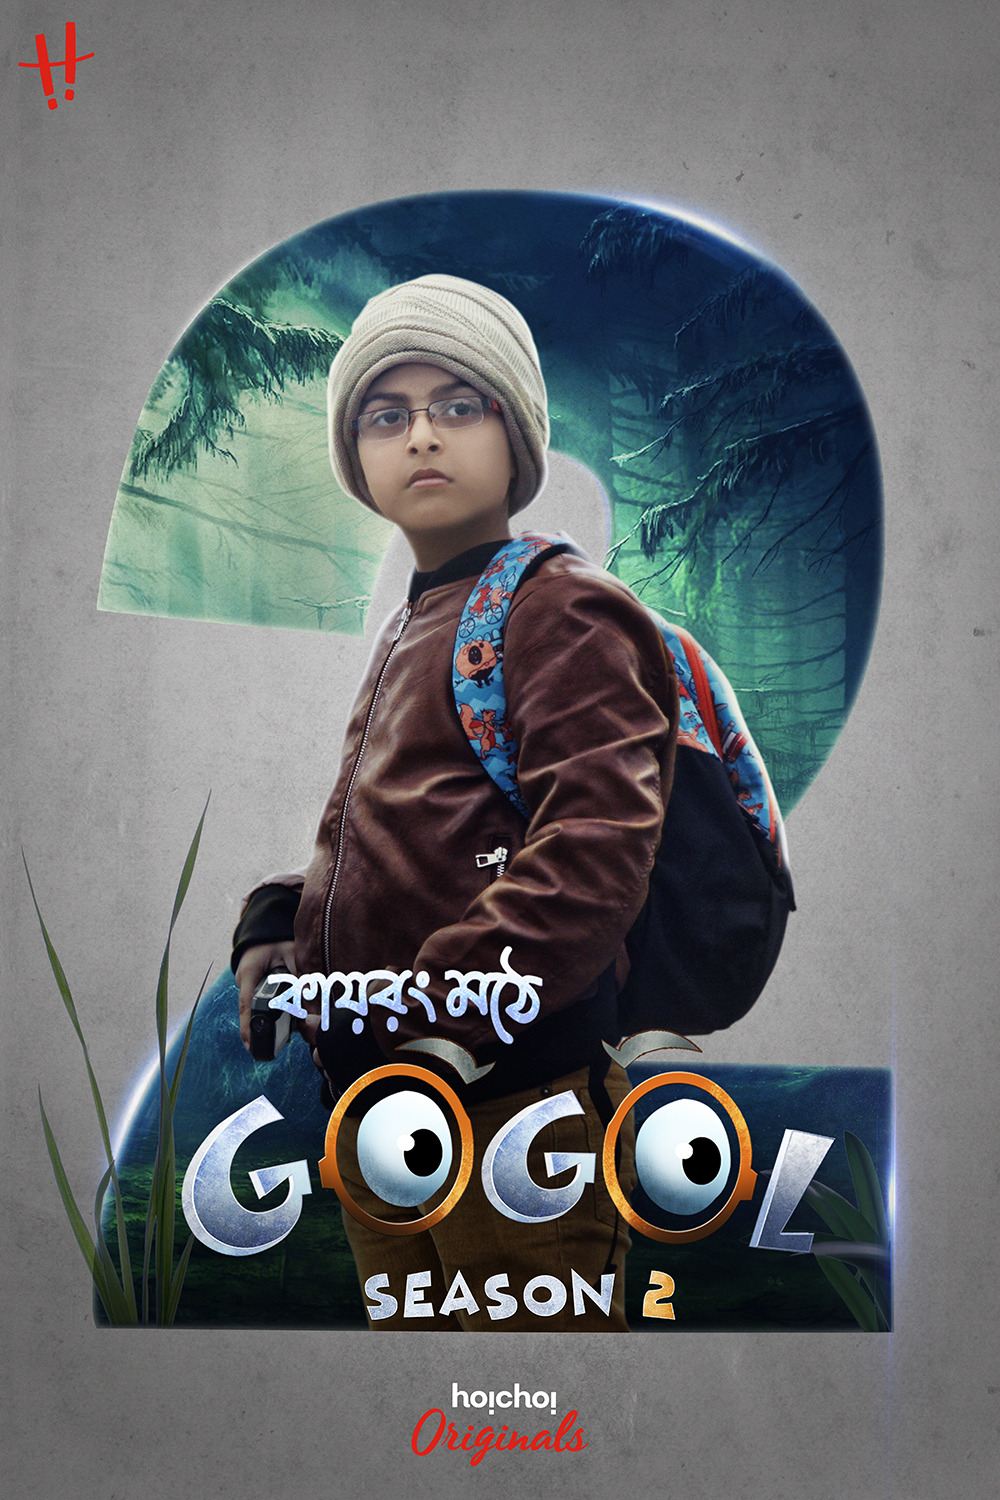 Extra Large TV Poster Image for Gogol 